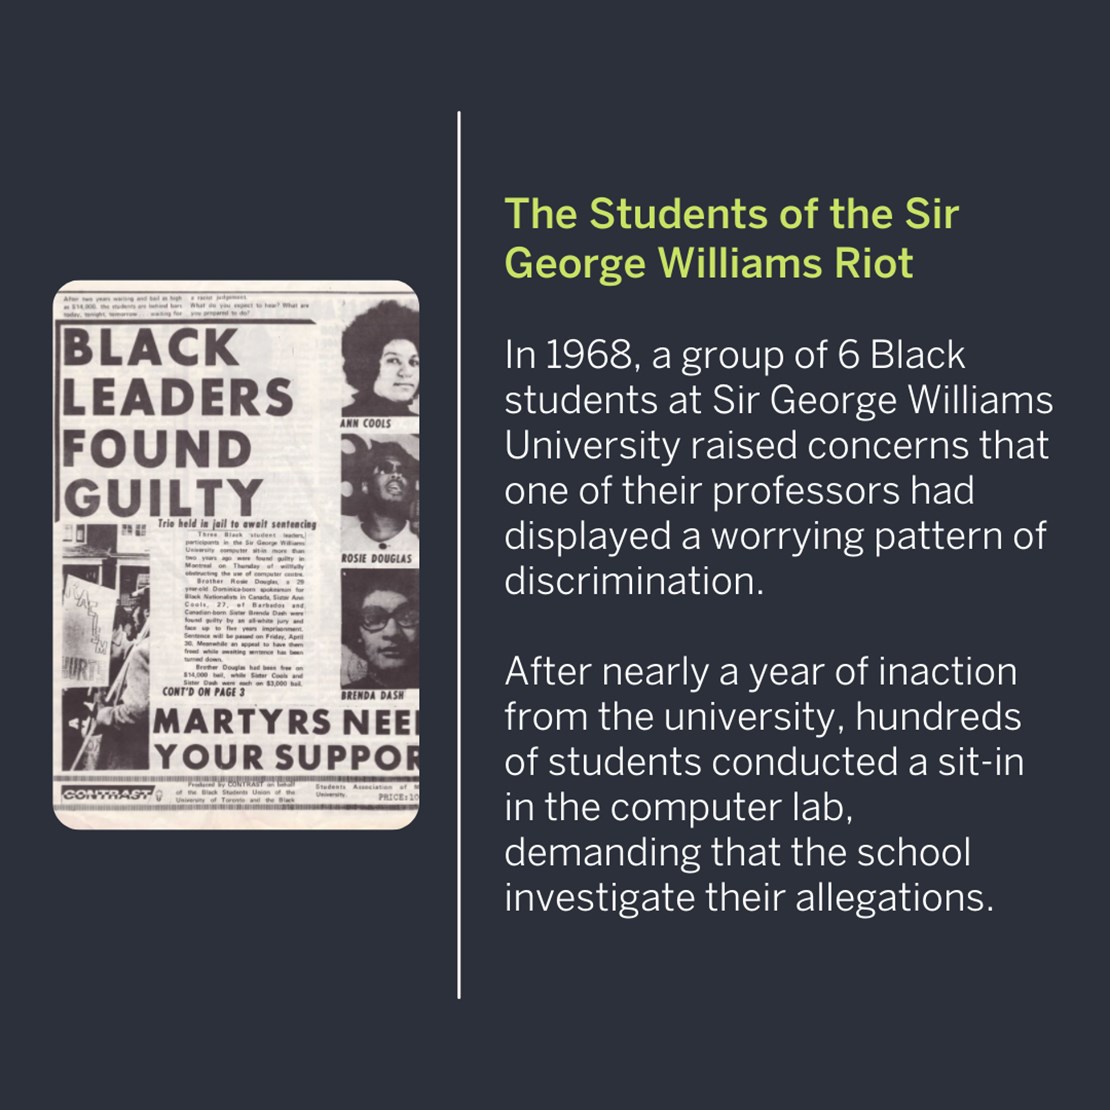 The Students of the Sir George Williams Riot